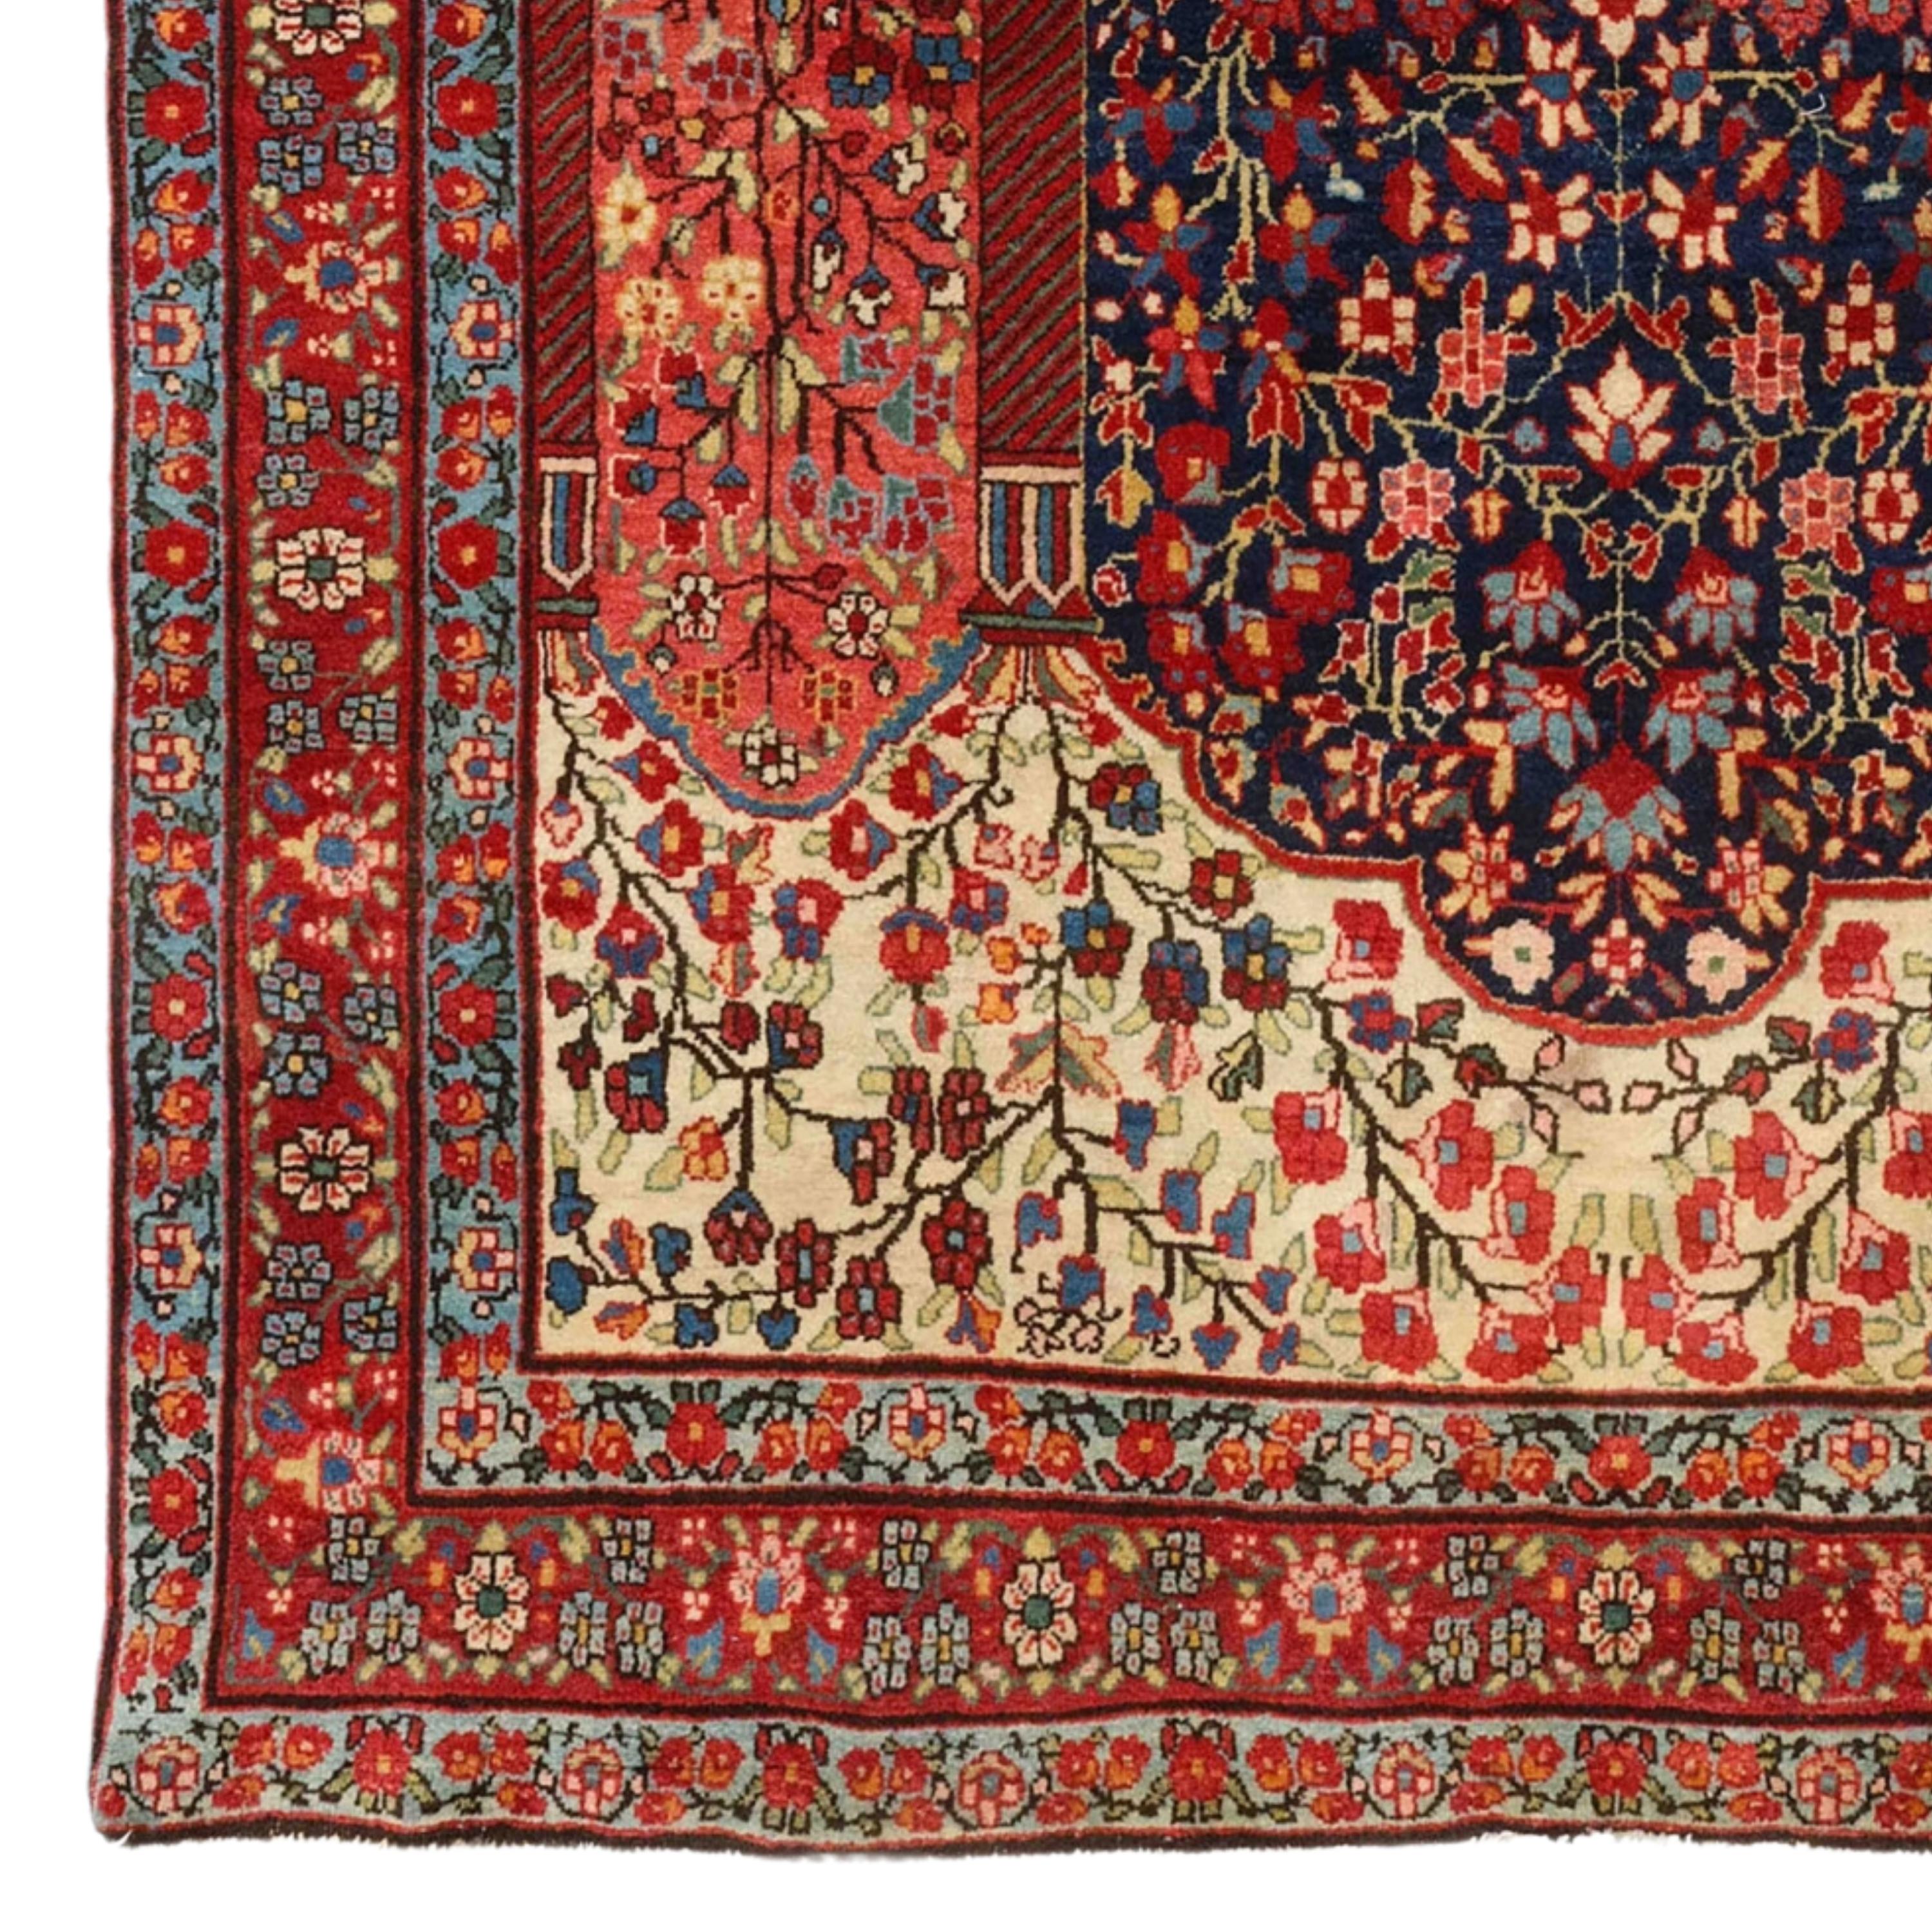 This magnificent carpet will fascinate you with its intricate designs and vibrant colors that reflect the rich history and craftsmanship of the period. Each stitch tells the story of skilled craftsmen who masterfully crafted every detail. Vibrant